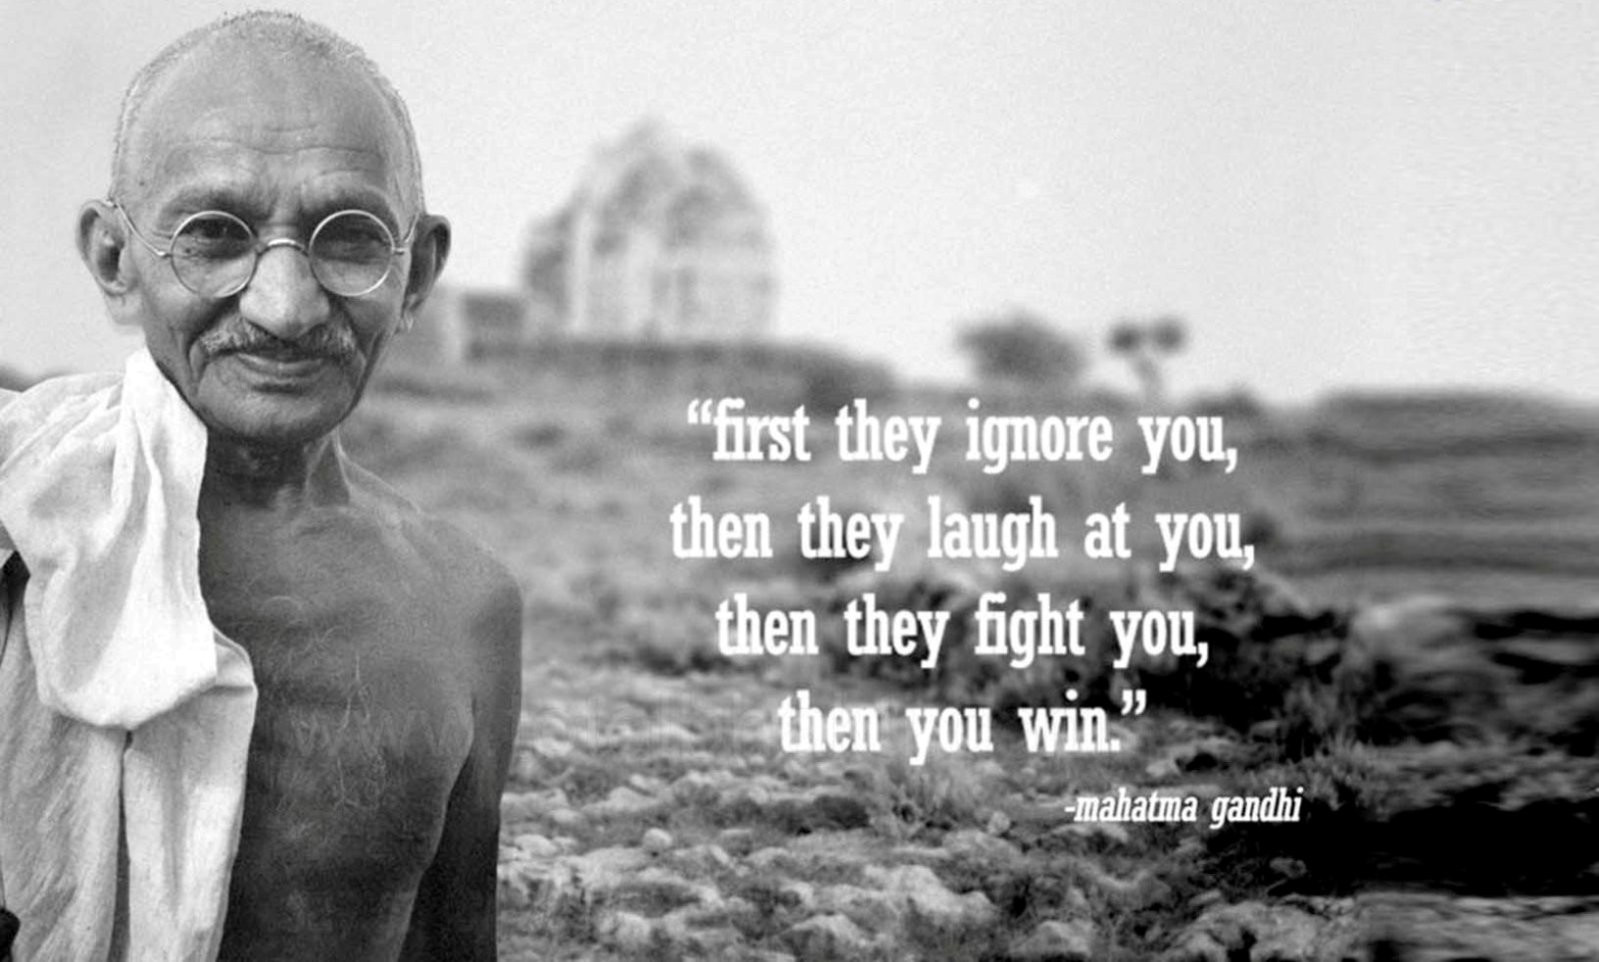 Gandhi Leadership Quotes
 Motivational Quotes Archives Page 2 of 7